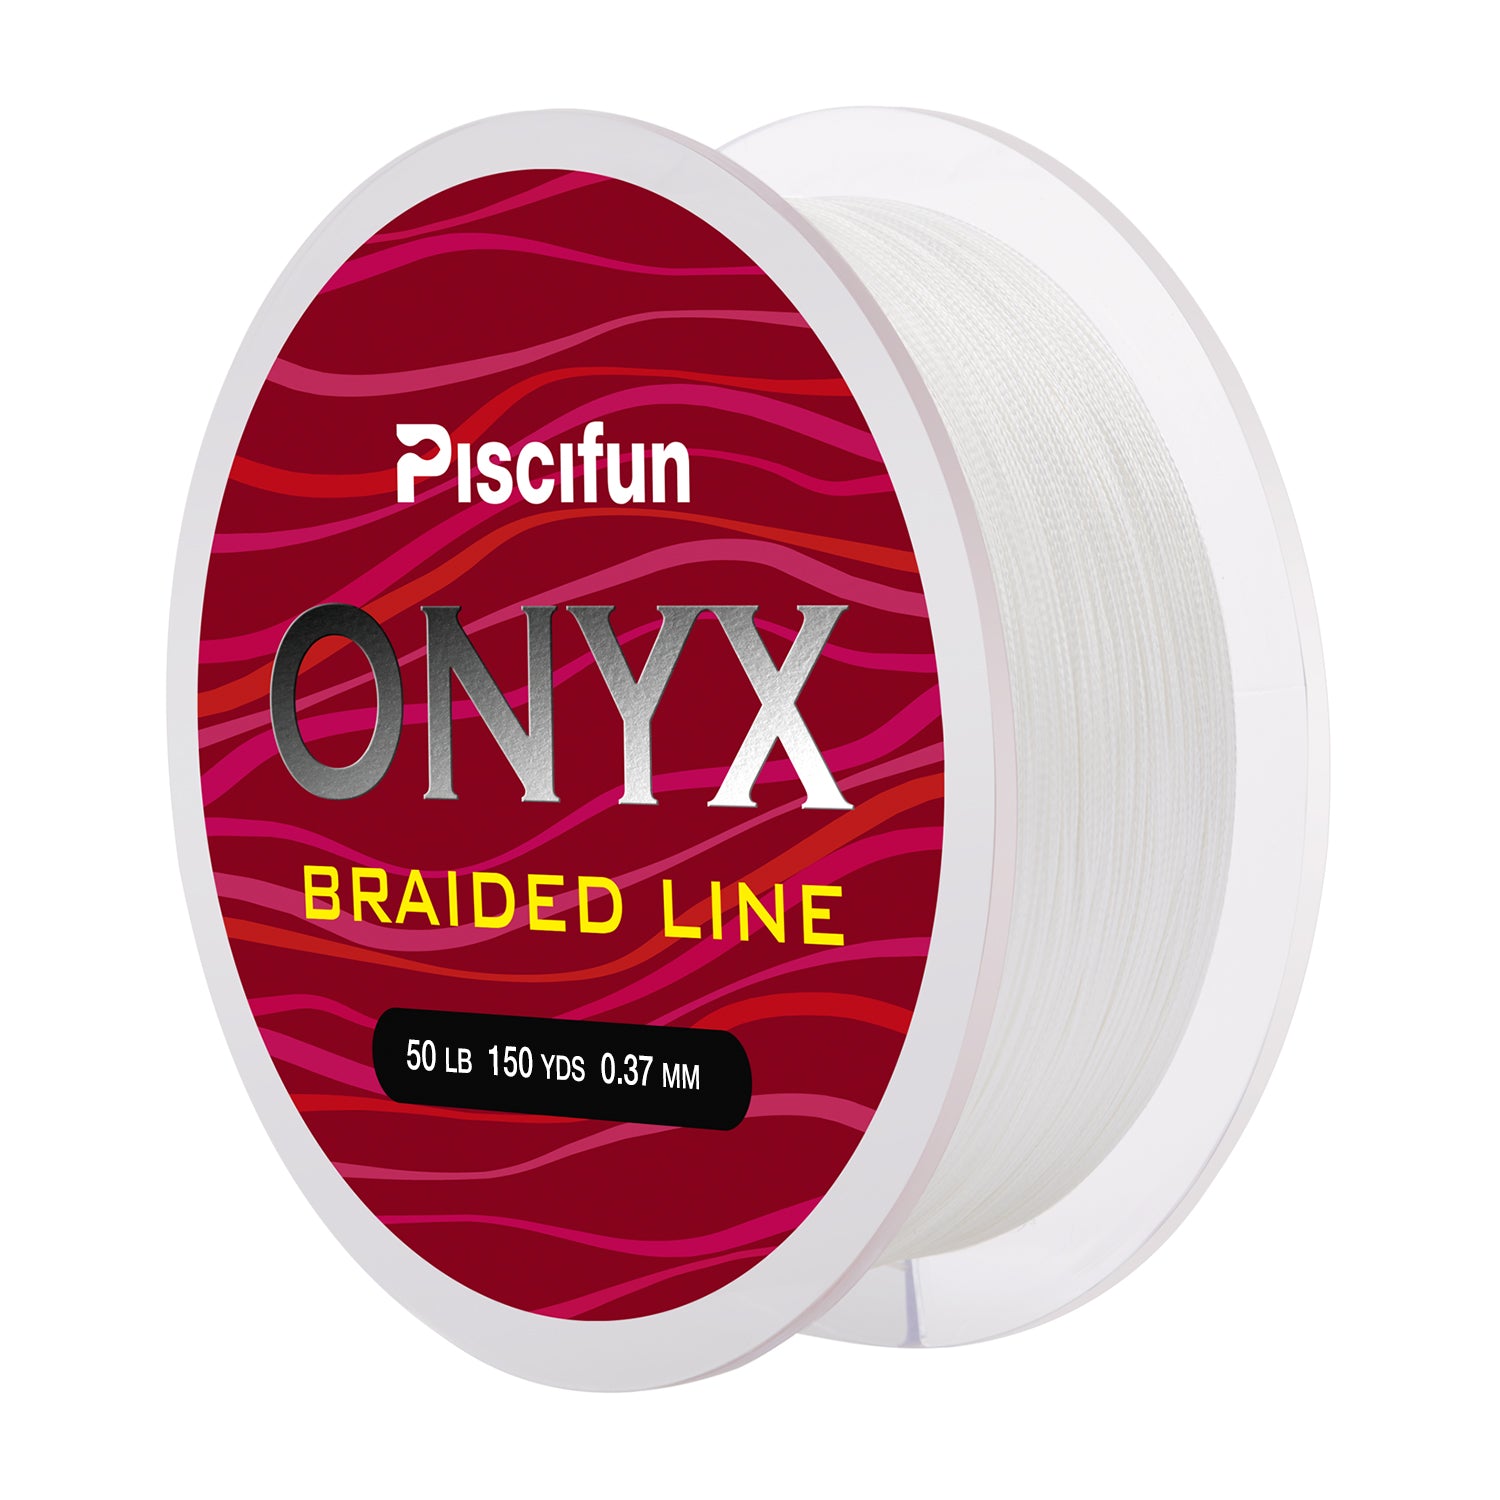 Piscifun Onyx Braided Fishing Line Advanced Superline Braid Lines 547Yd 15lb  Green,  price tracker / tracking,  price history charts,   price watches,  price drop alerts